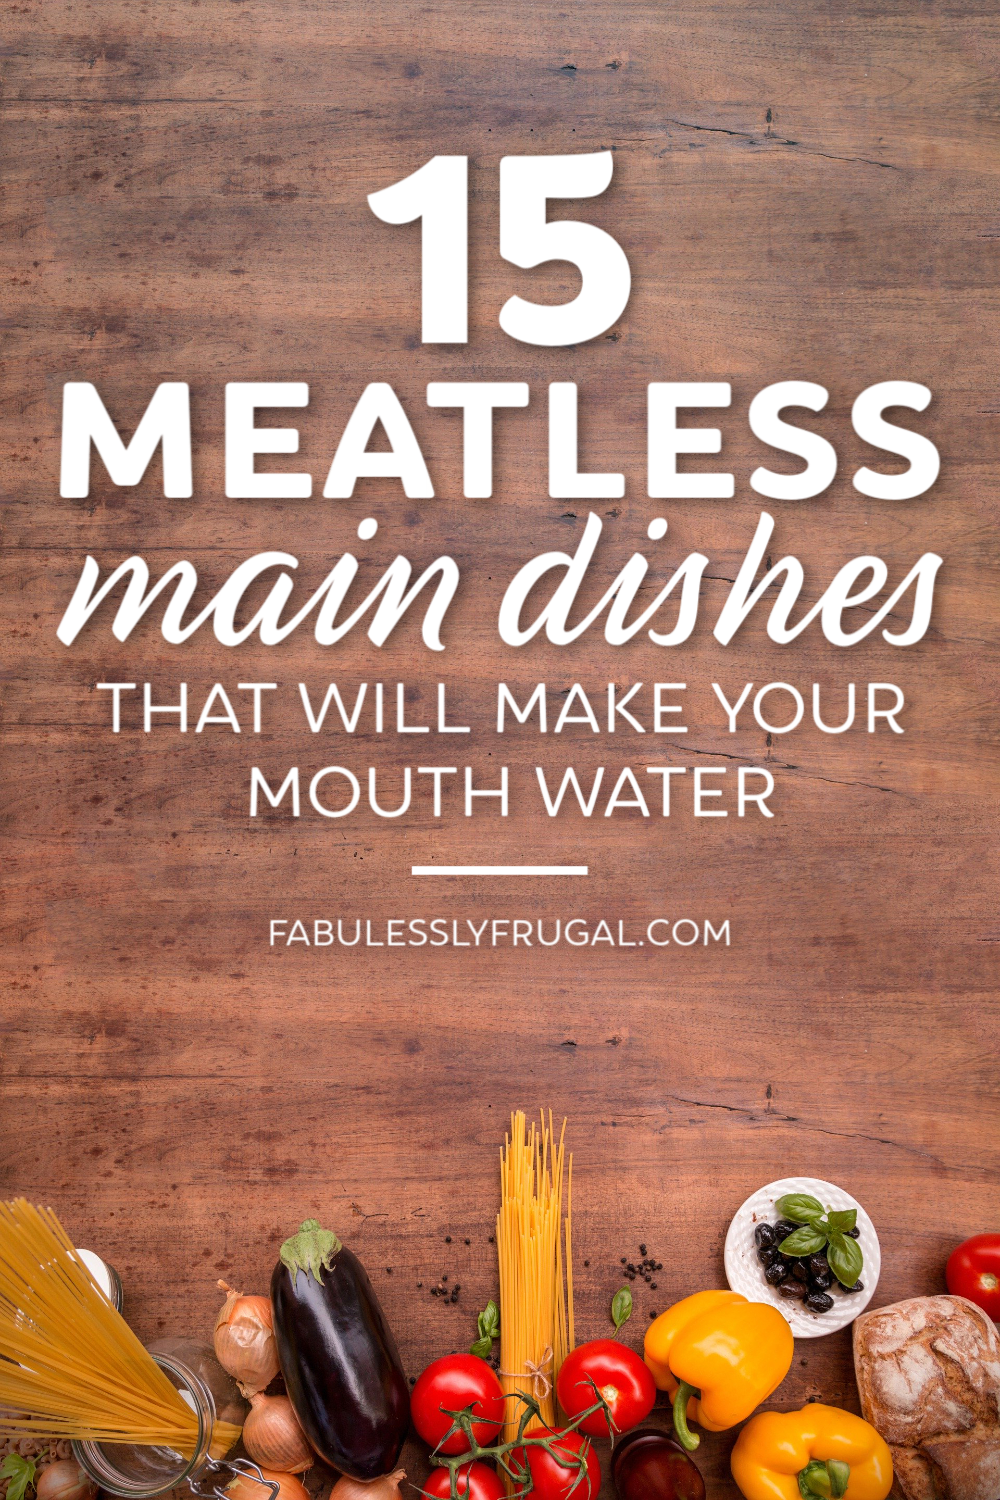 Meatless main dishes